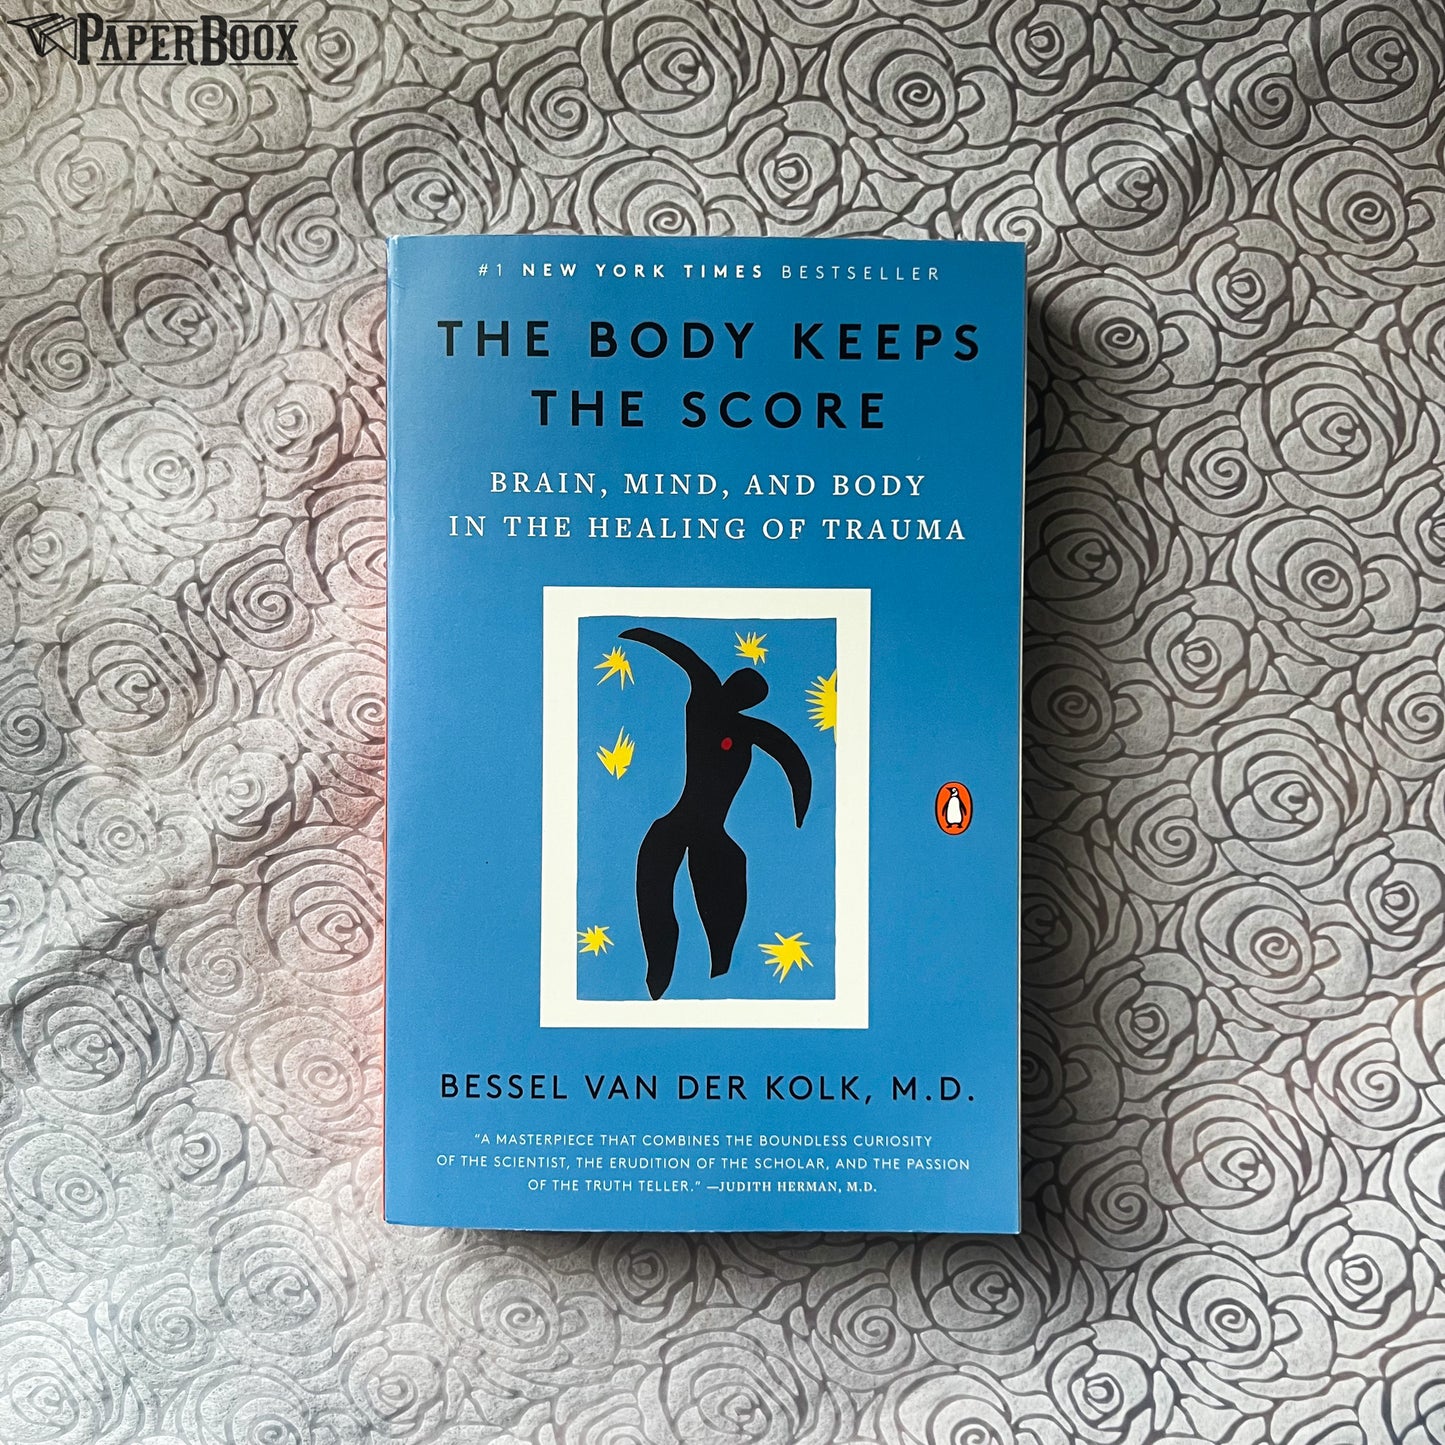 The Body Keeps the Score: Brain, Mind, and Body in the Healing of Trauma (Paperback)